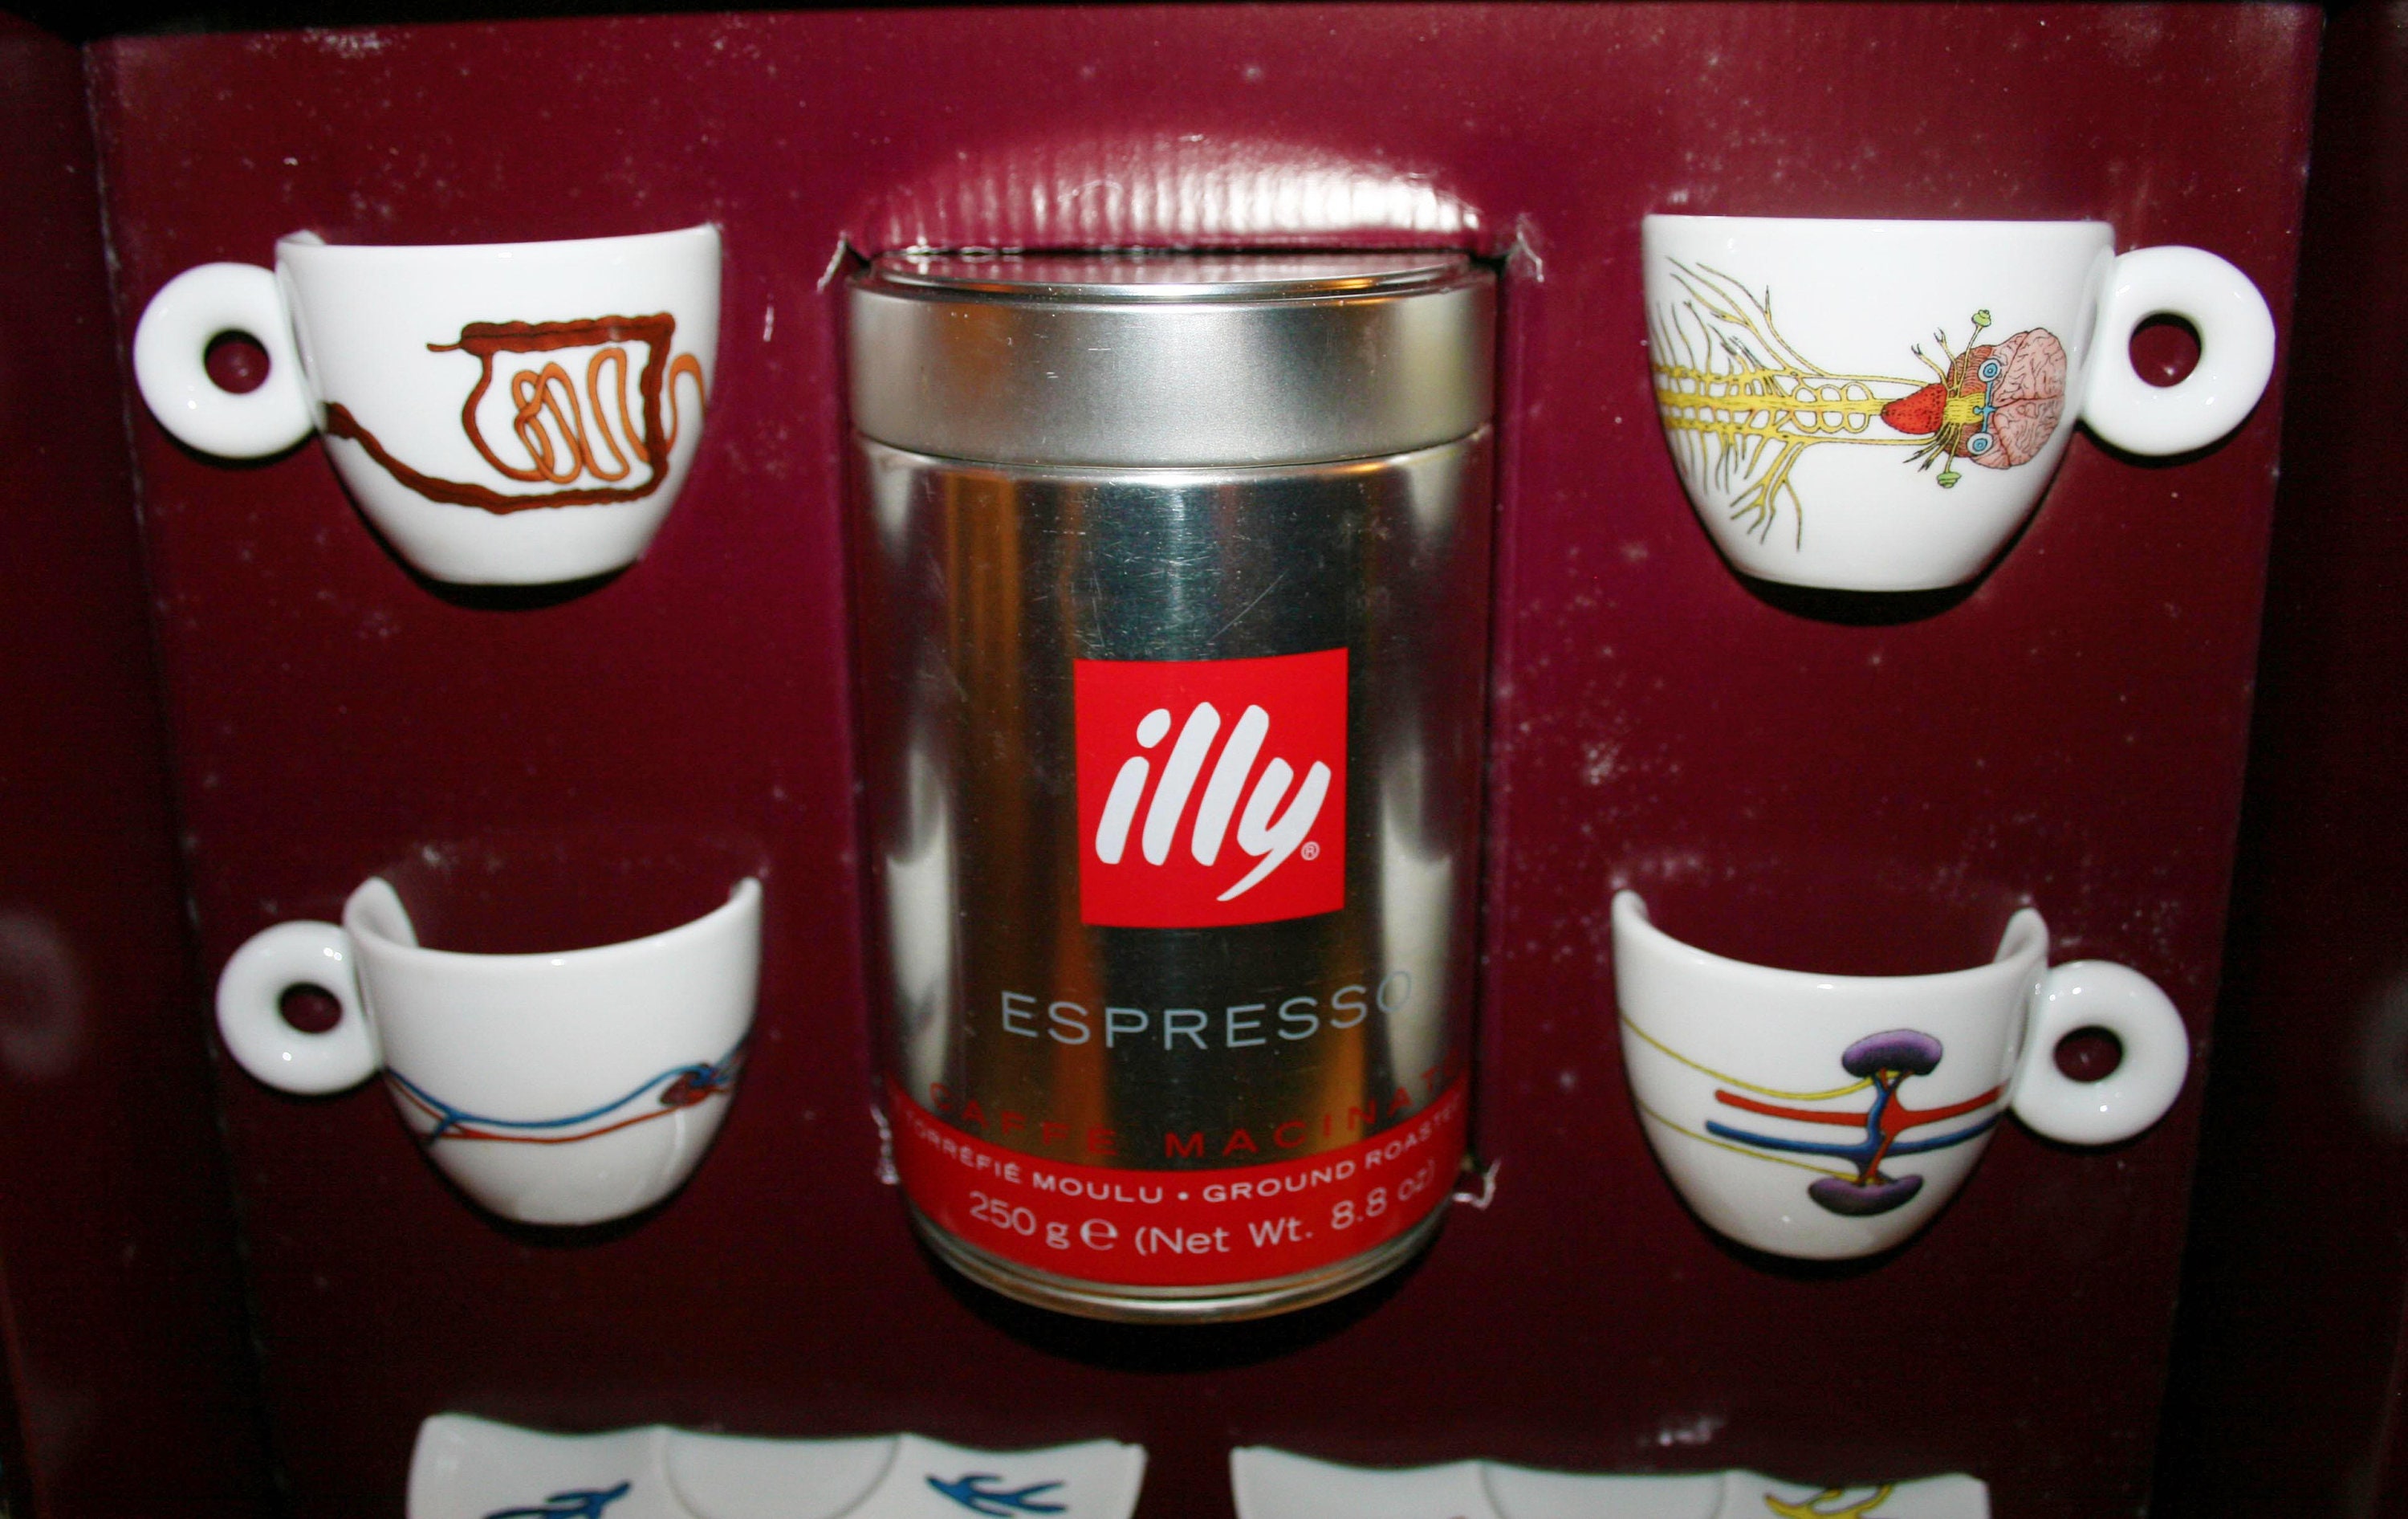 illy Latte Glasses - Set of 6